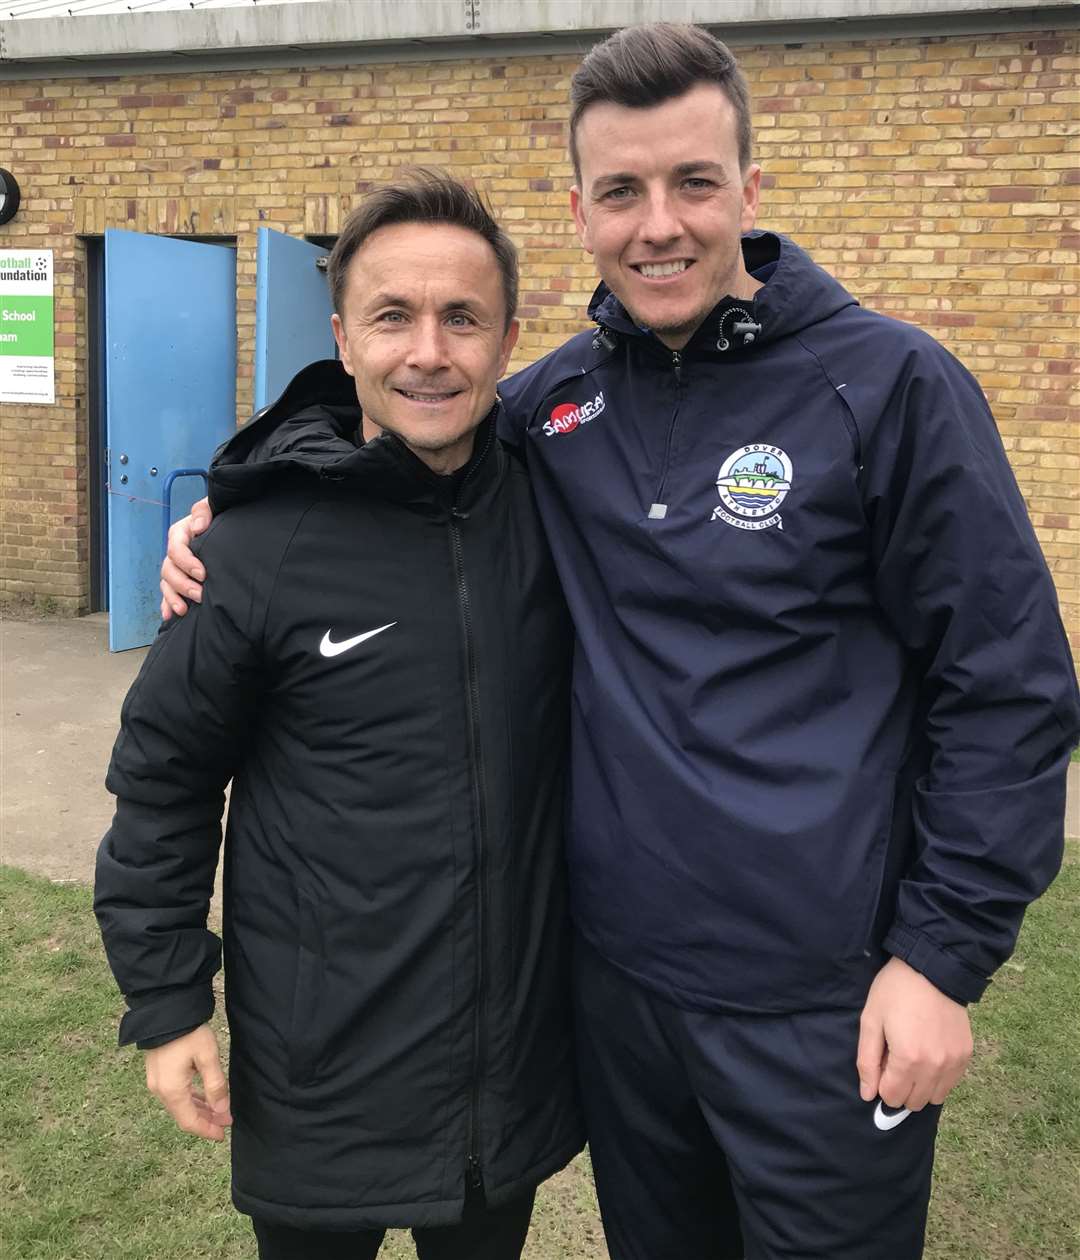 Chelsea legend Dennis Wise, who is now the Indonesia U17 coach, and Dover Athletic academy manager, Mike Sandmann